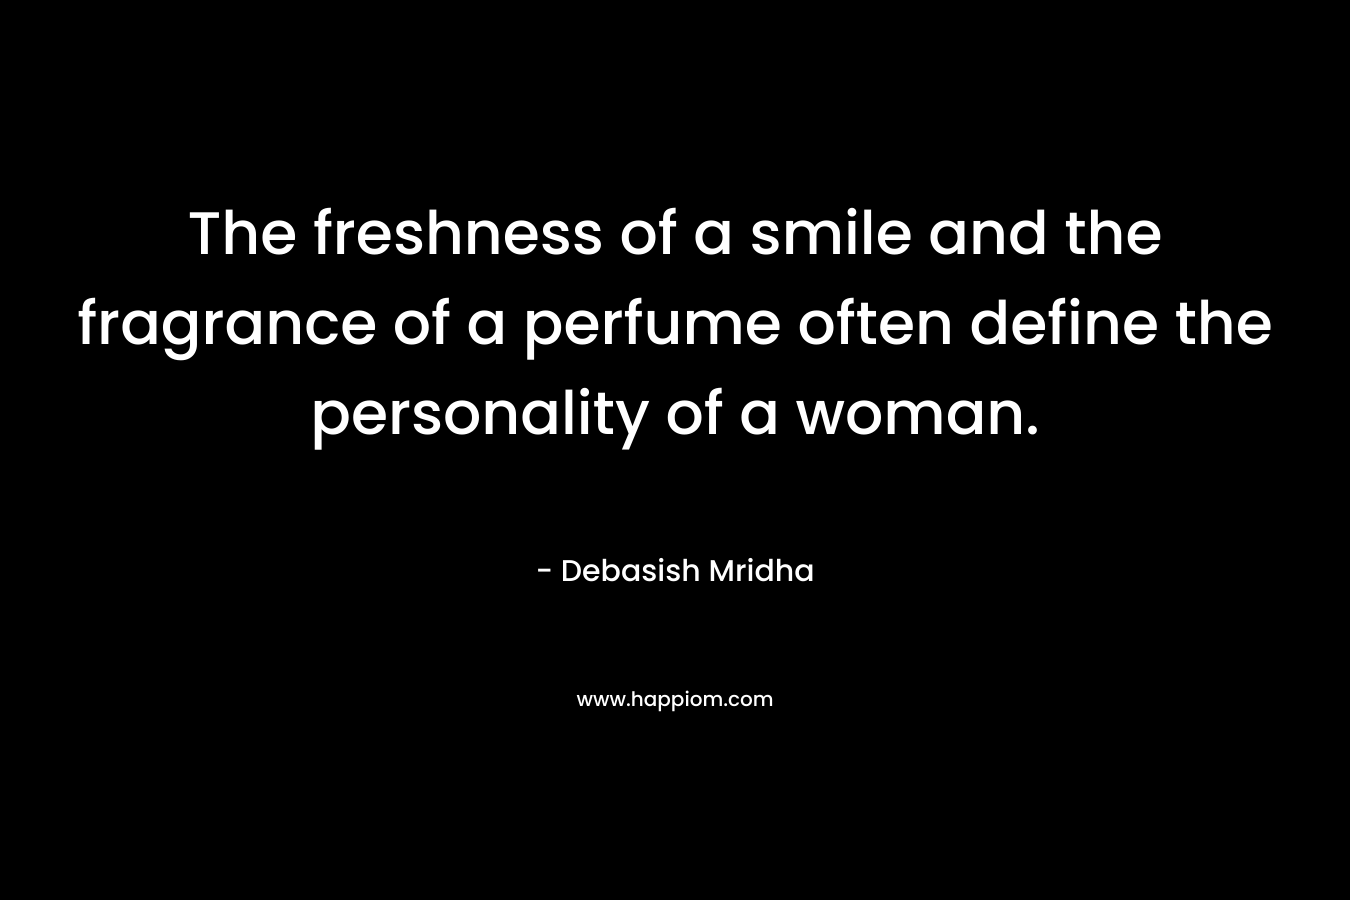 The freshness of a smile and the fragrance of a perfume often define the personality of a woman. – Debasish Mridha